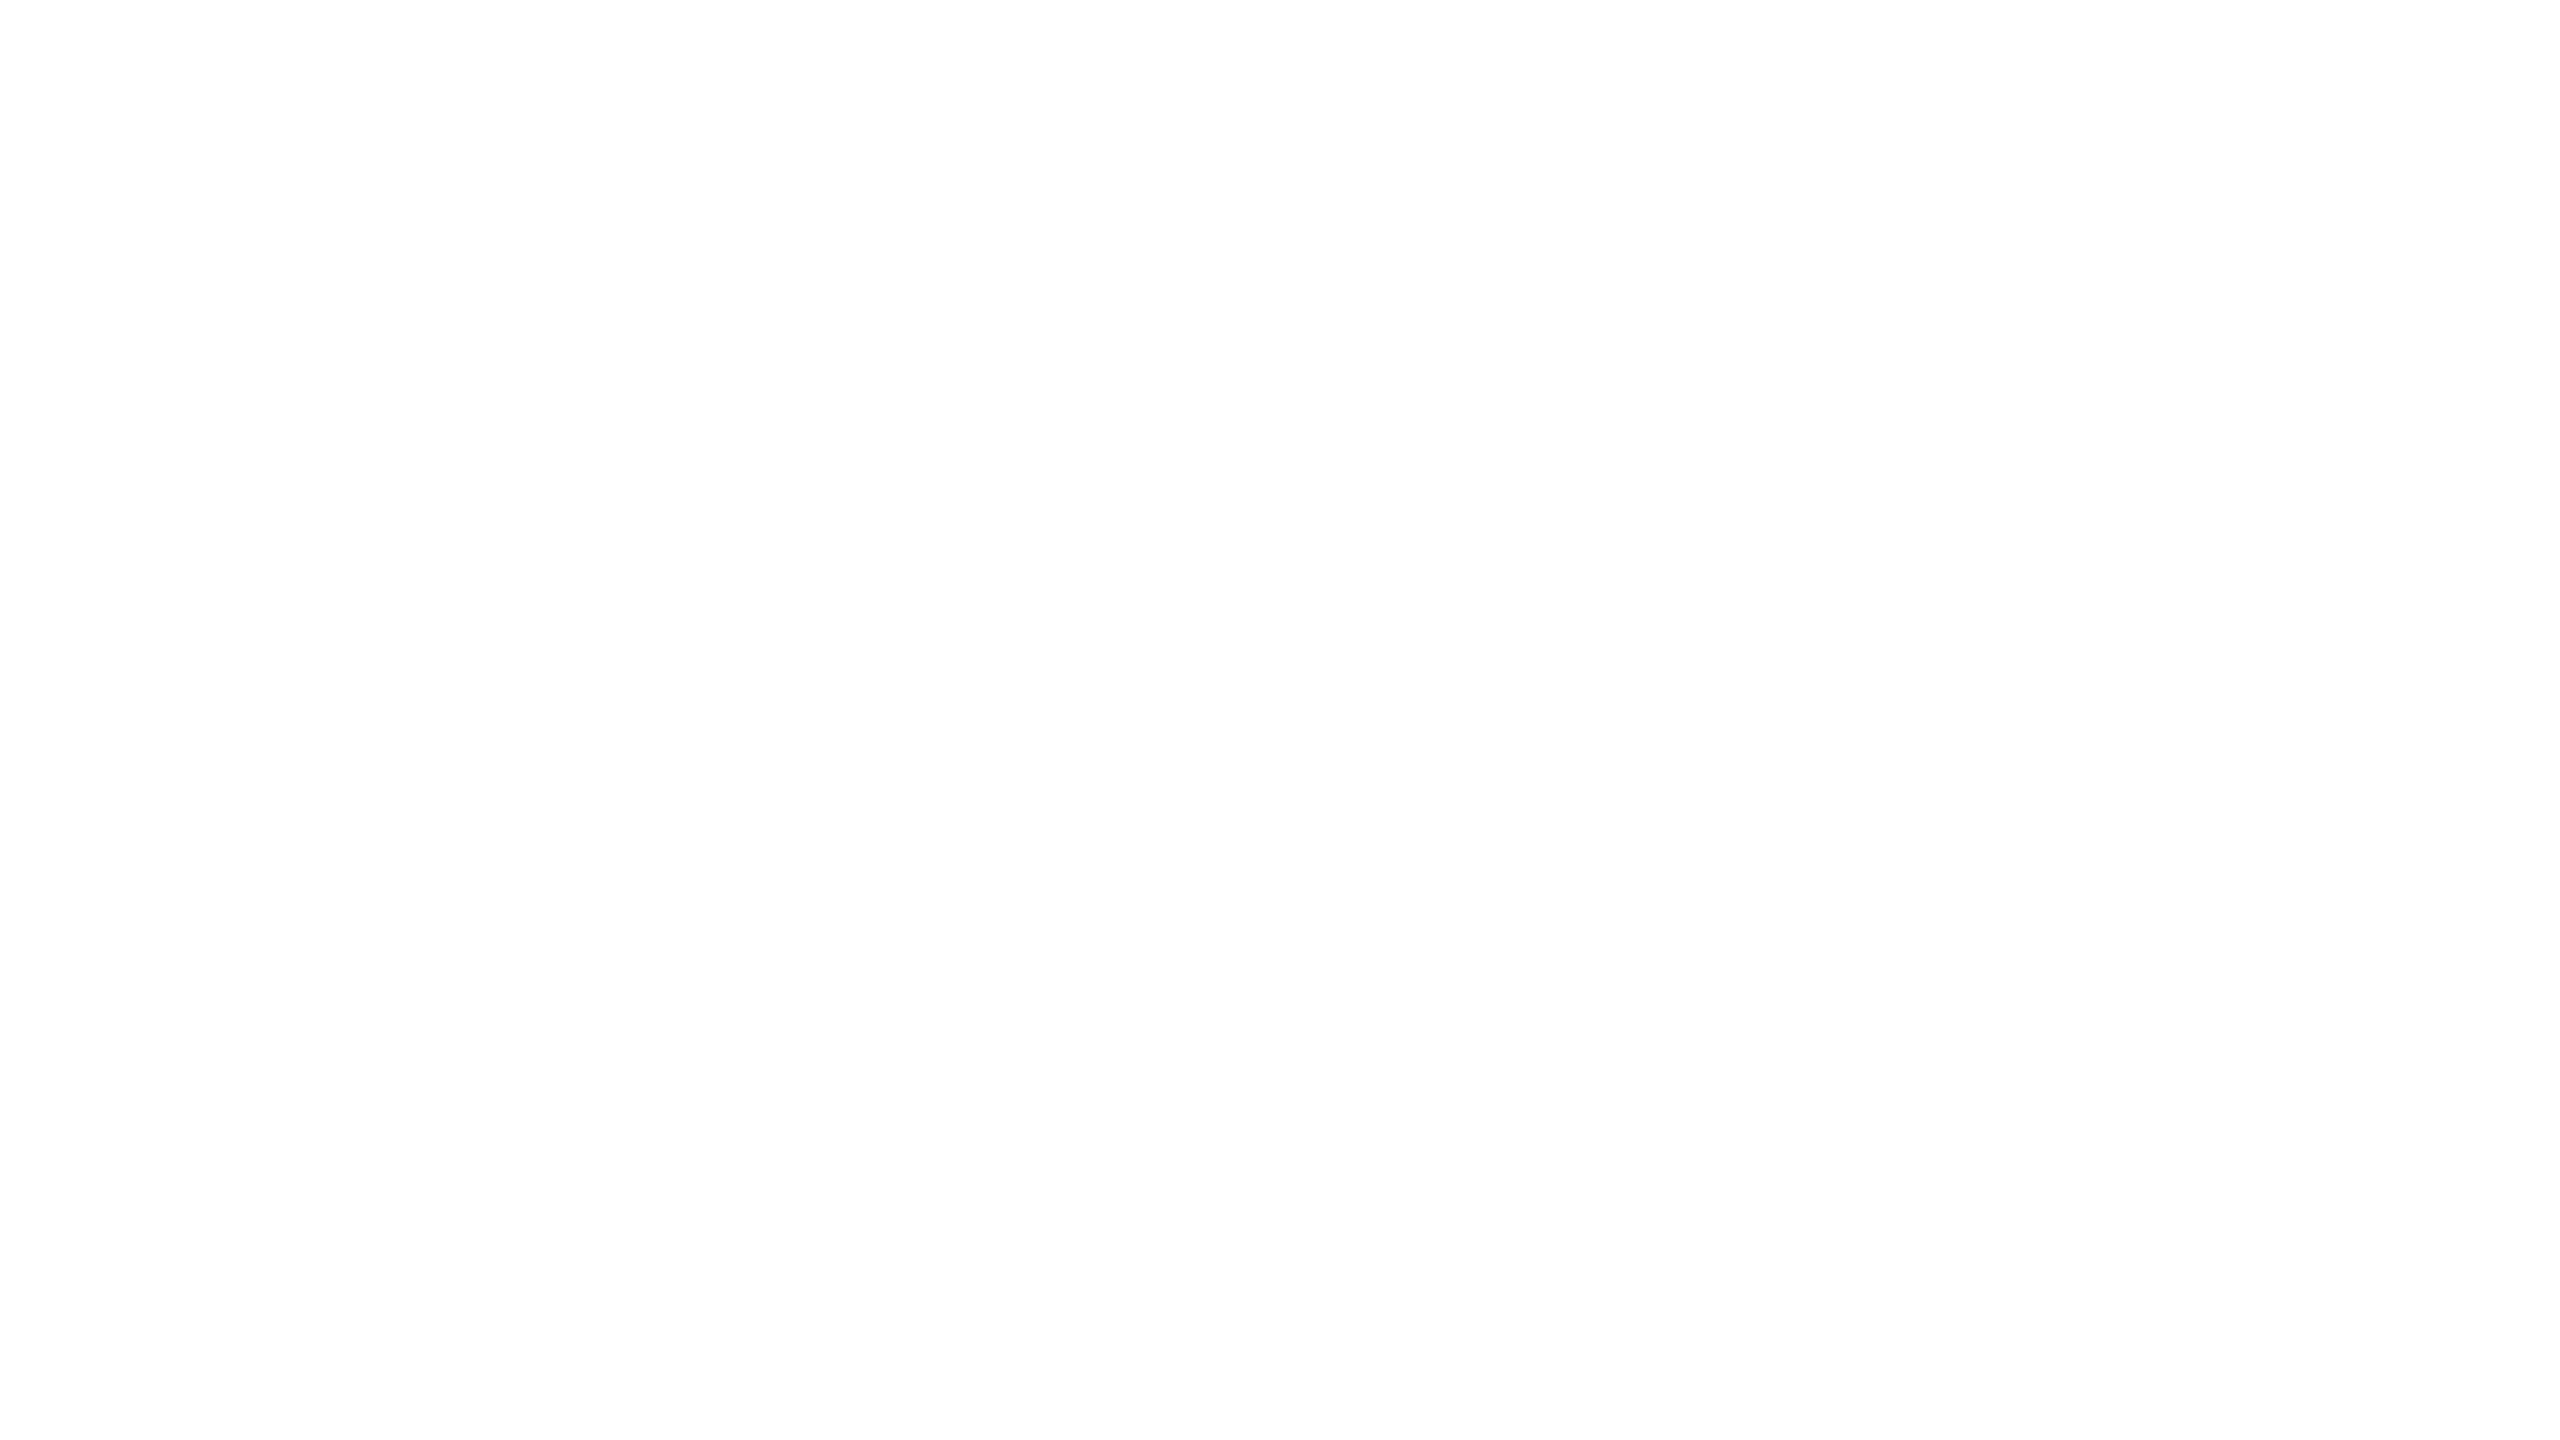 the-movie-channel-logo